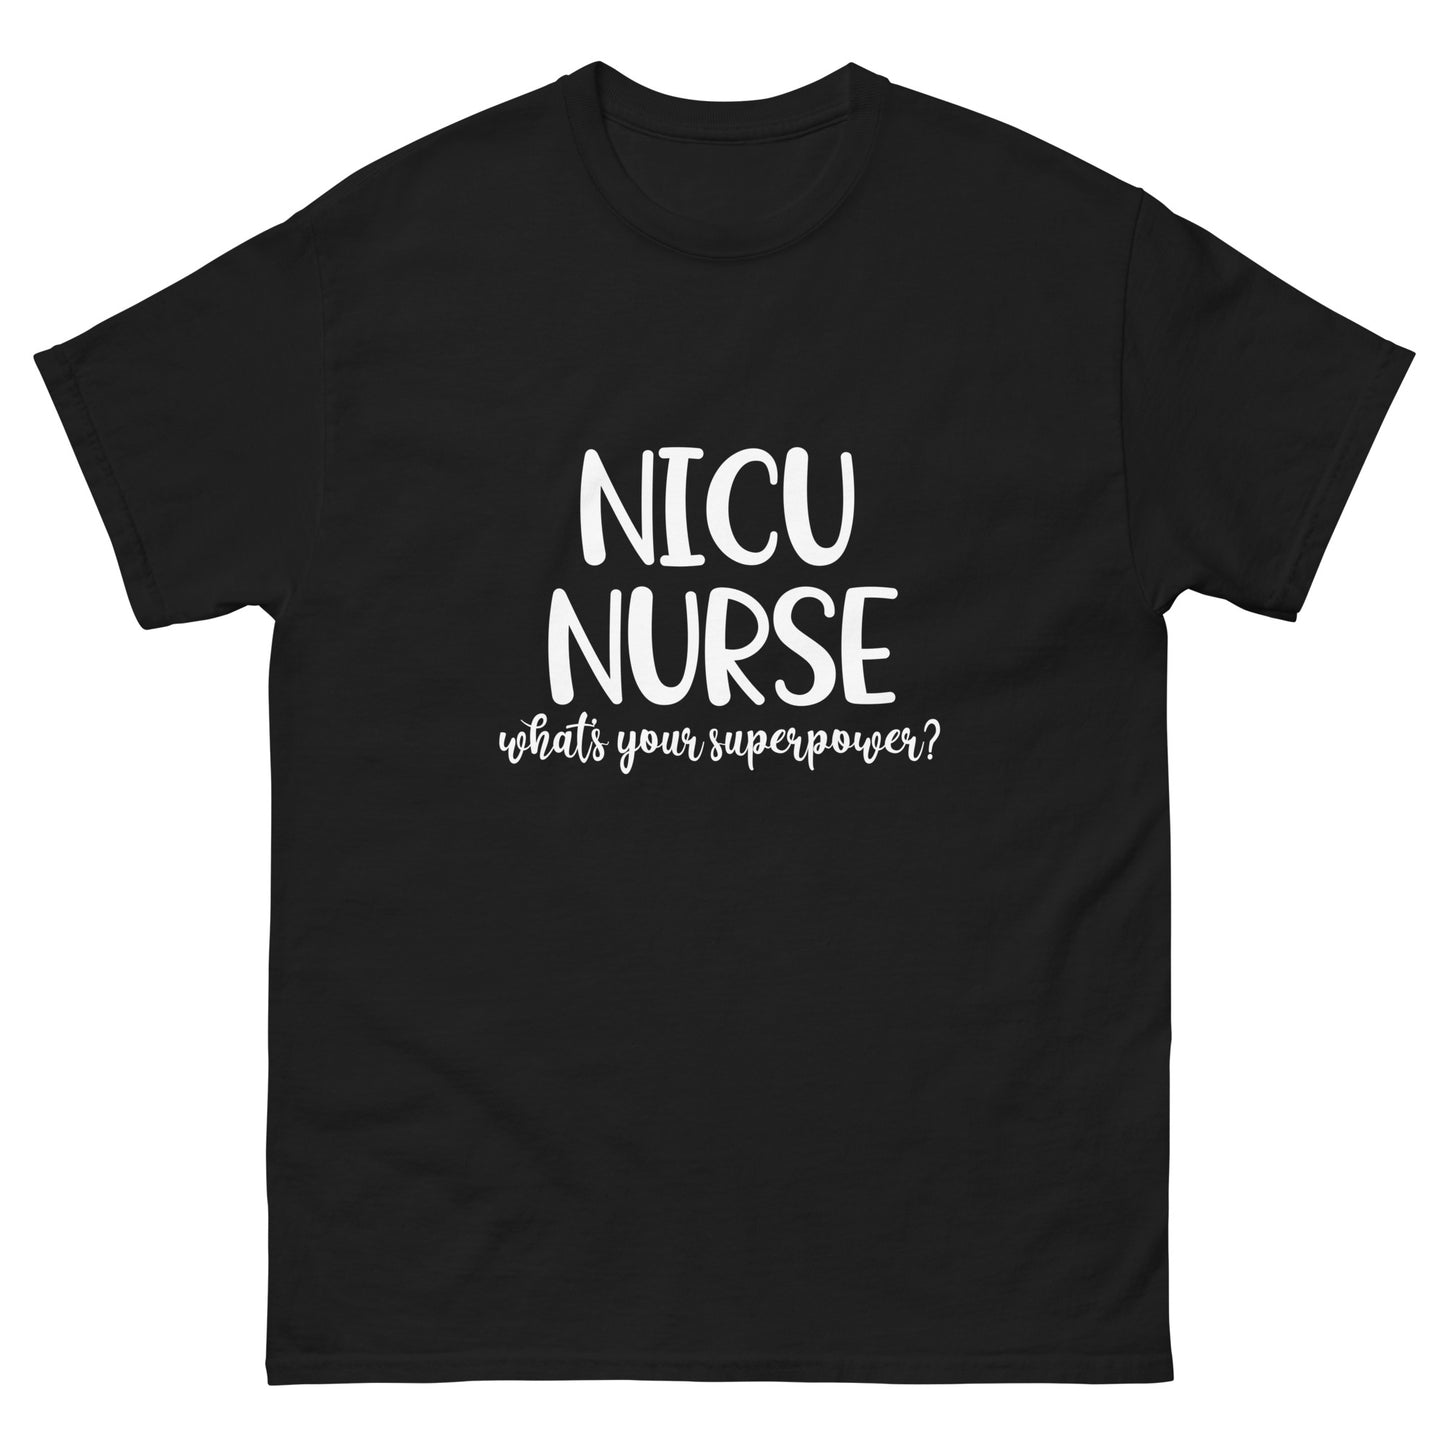 NICU Nurse Whats Your Superpower classic tee